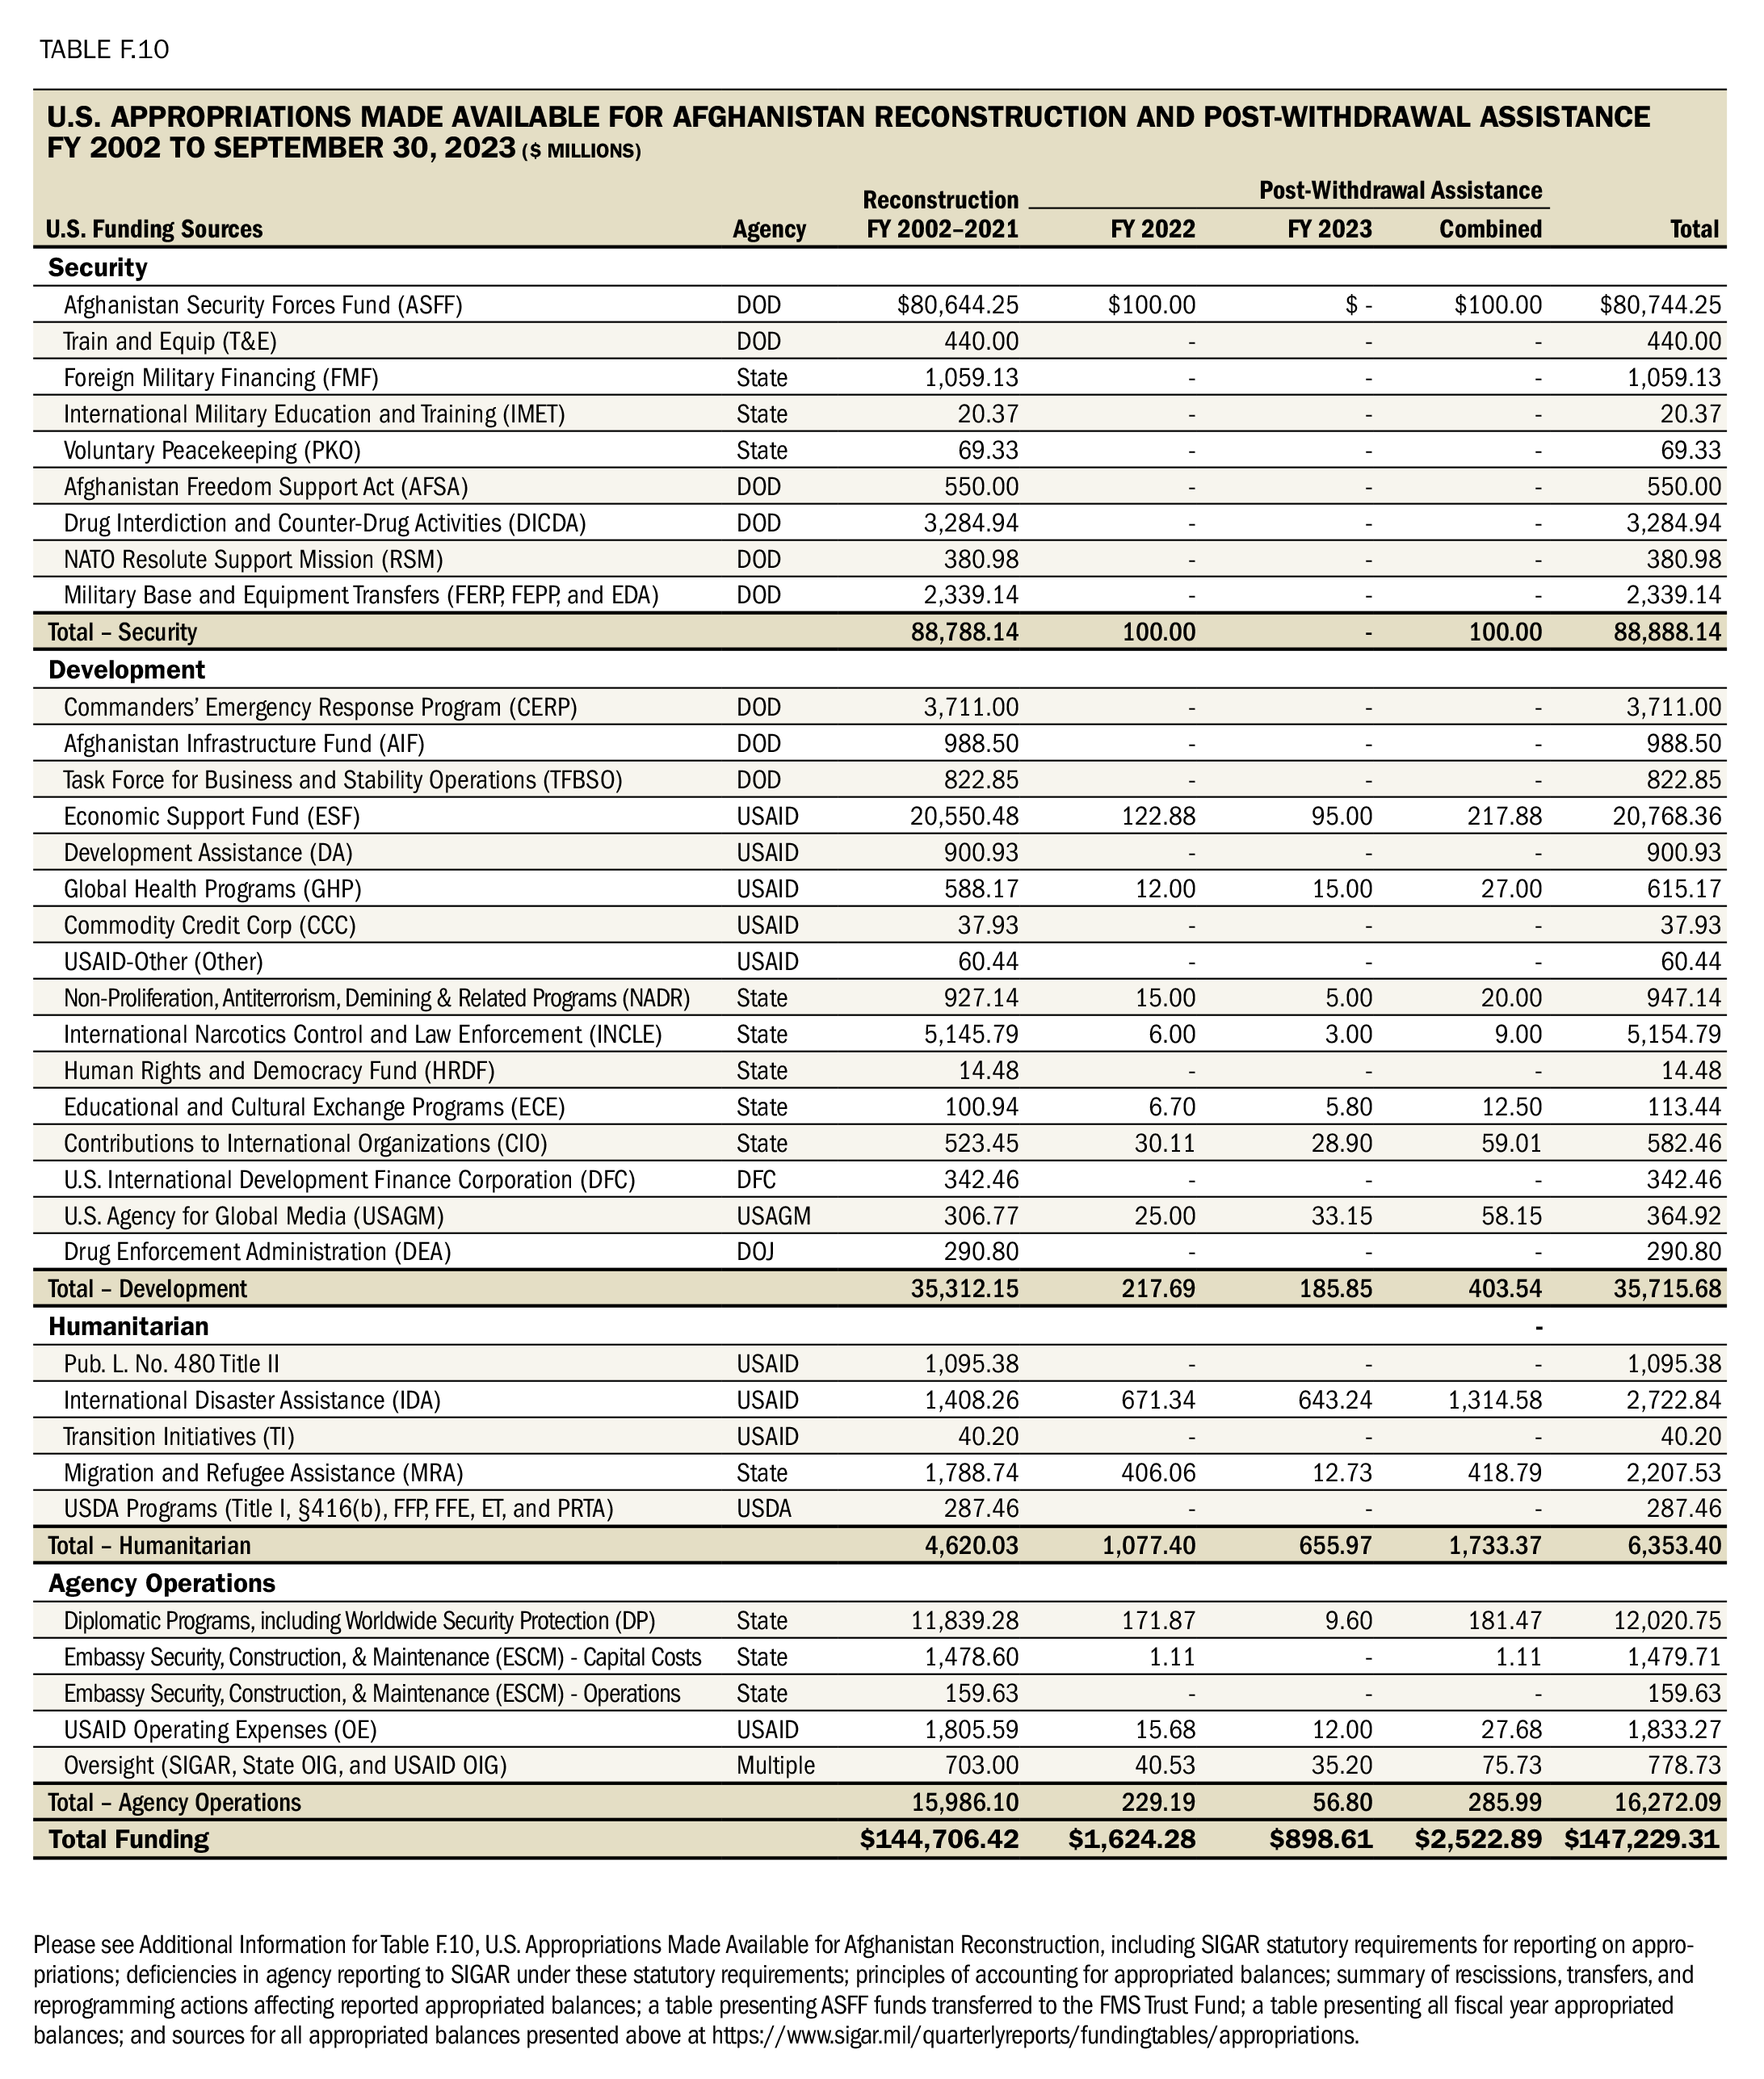 Table F.10 U.S. Appropriations for Afghanistan Reconstruction and Post-Withdrawal Assistance Table